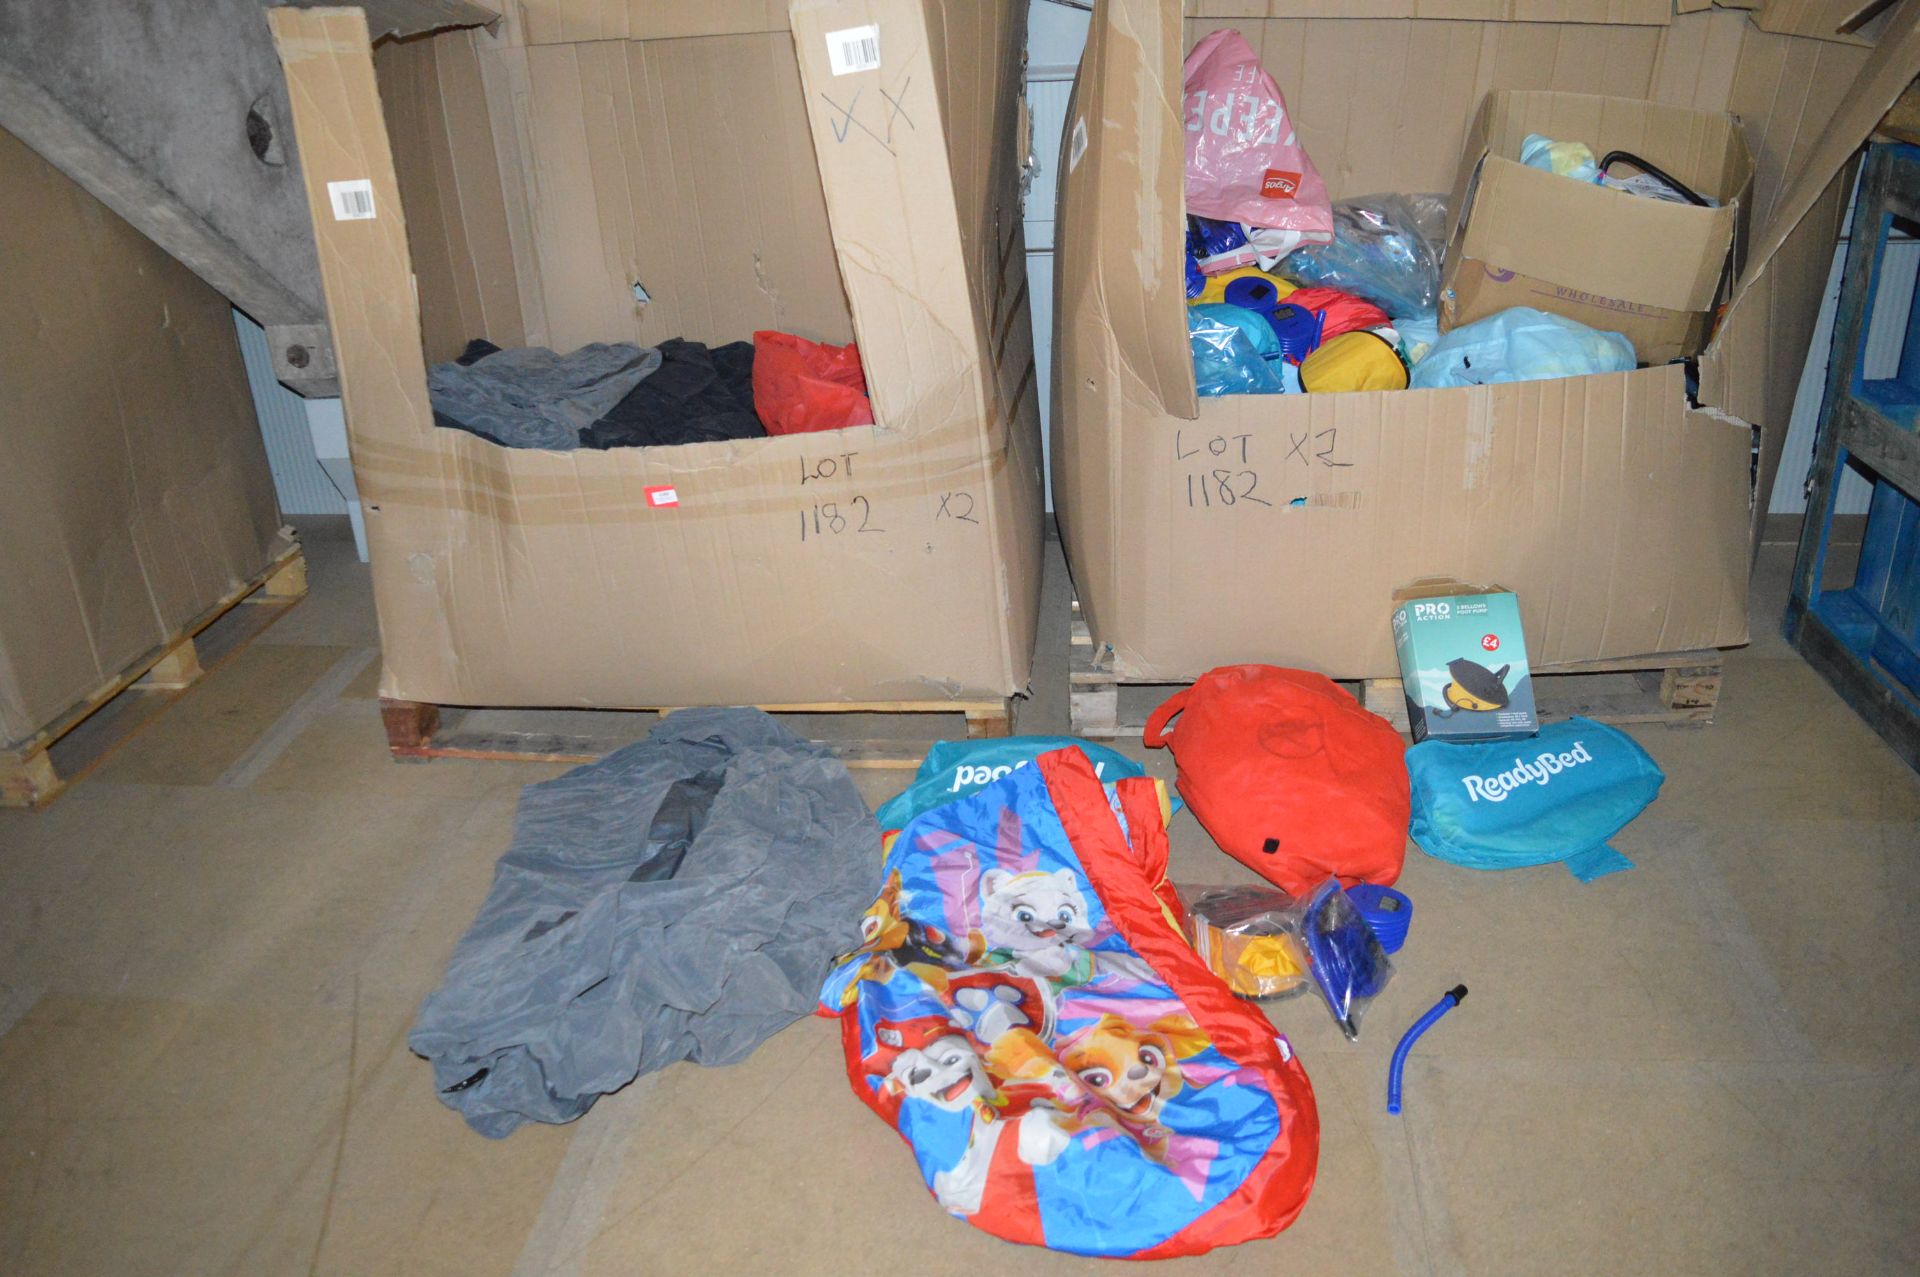 Two Pallets Containing a Quantity of Inflatable Items, Air Furniture, etc. (salvage)